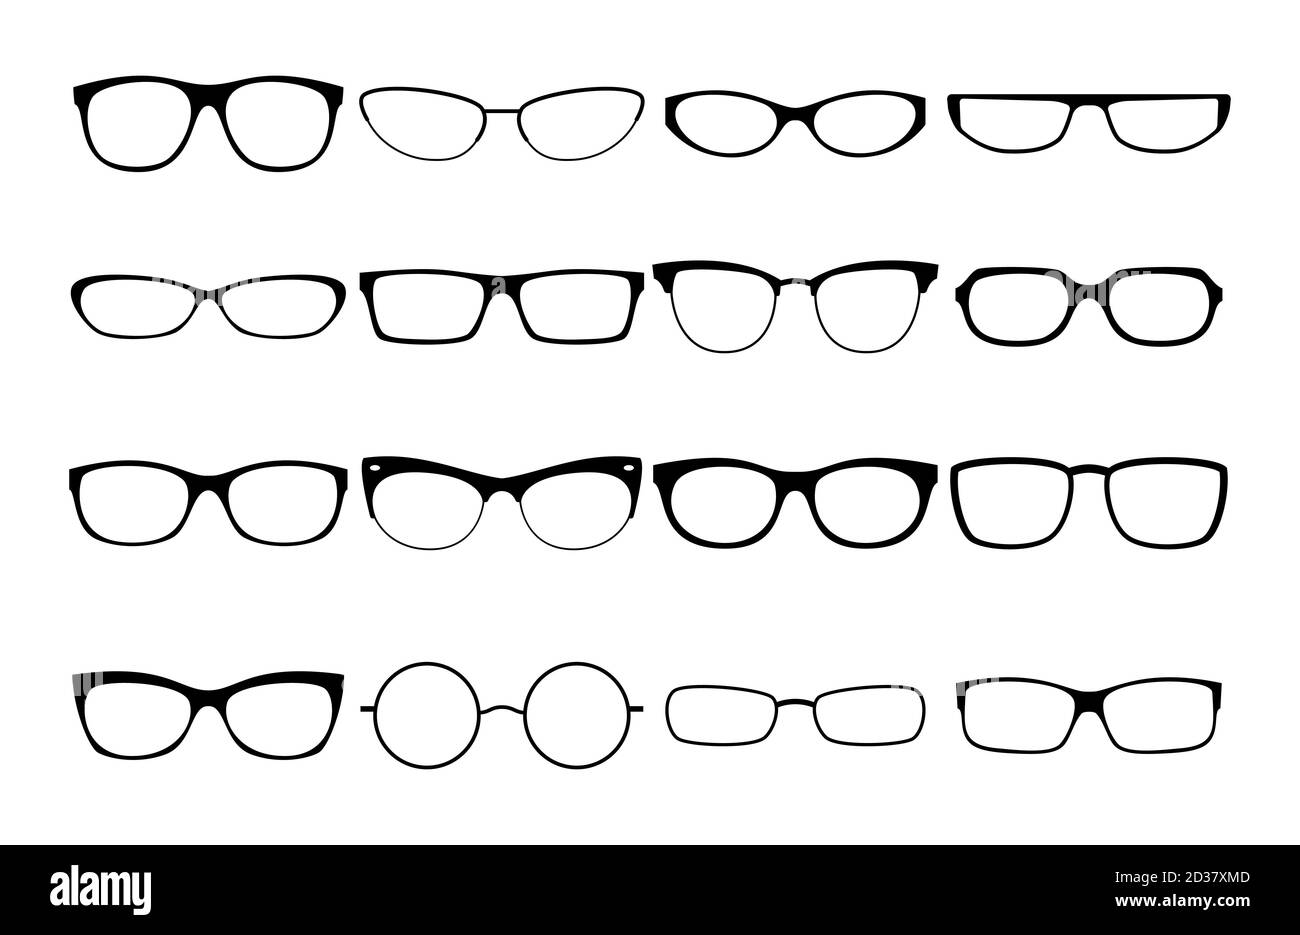 Spectacles Stock Vector Images - Alamy